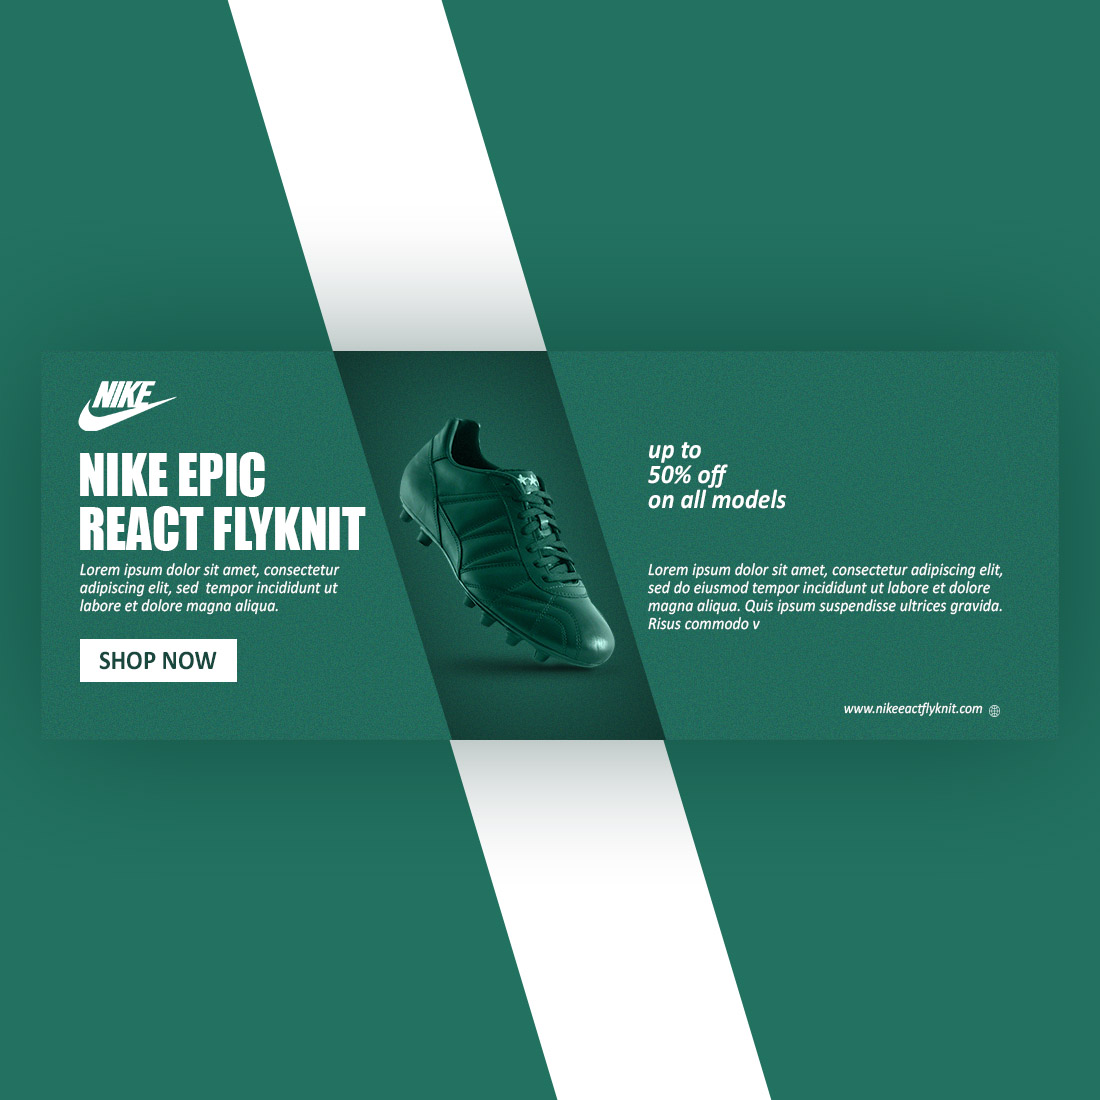 Nike Epic React flyknit banner cover image.